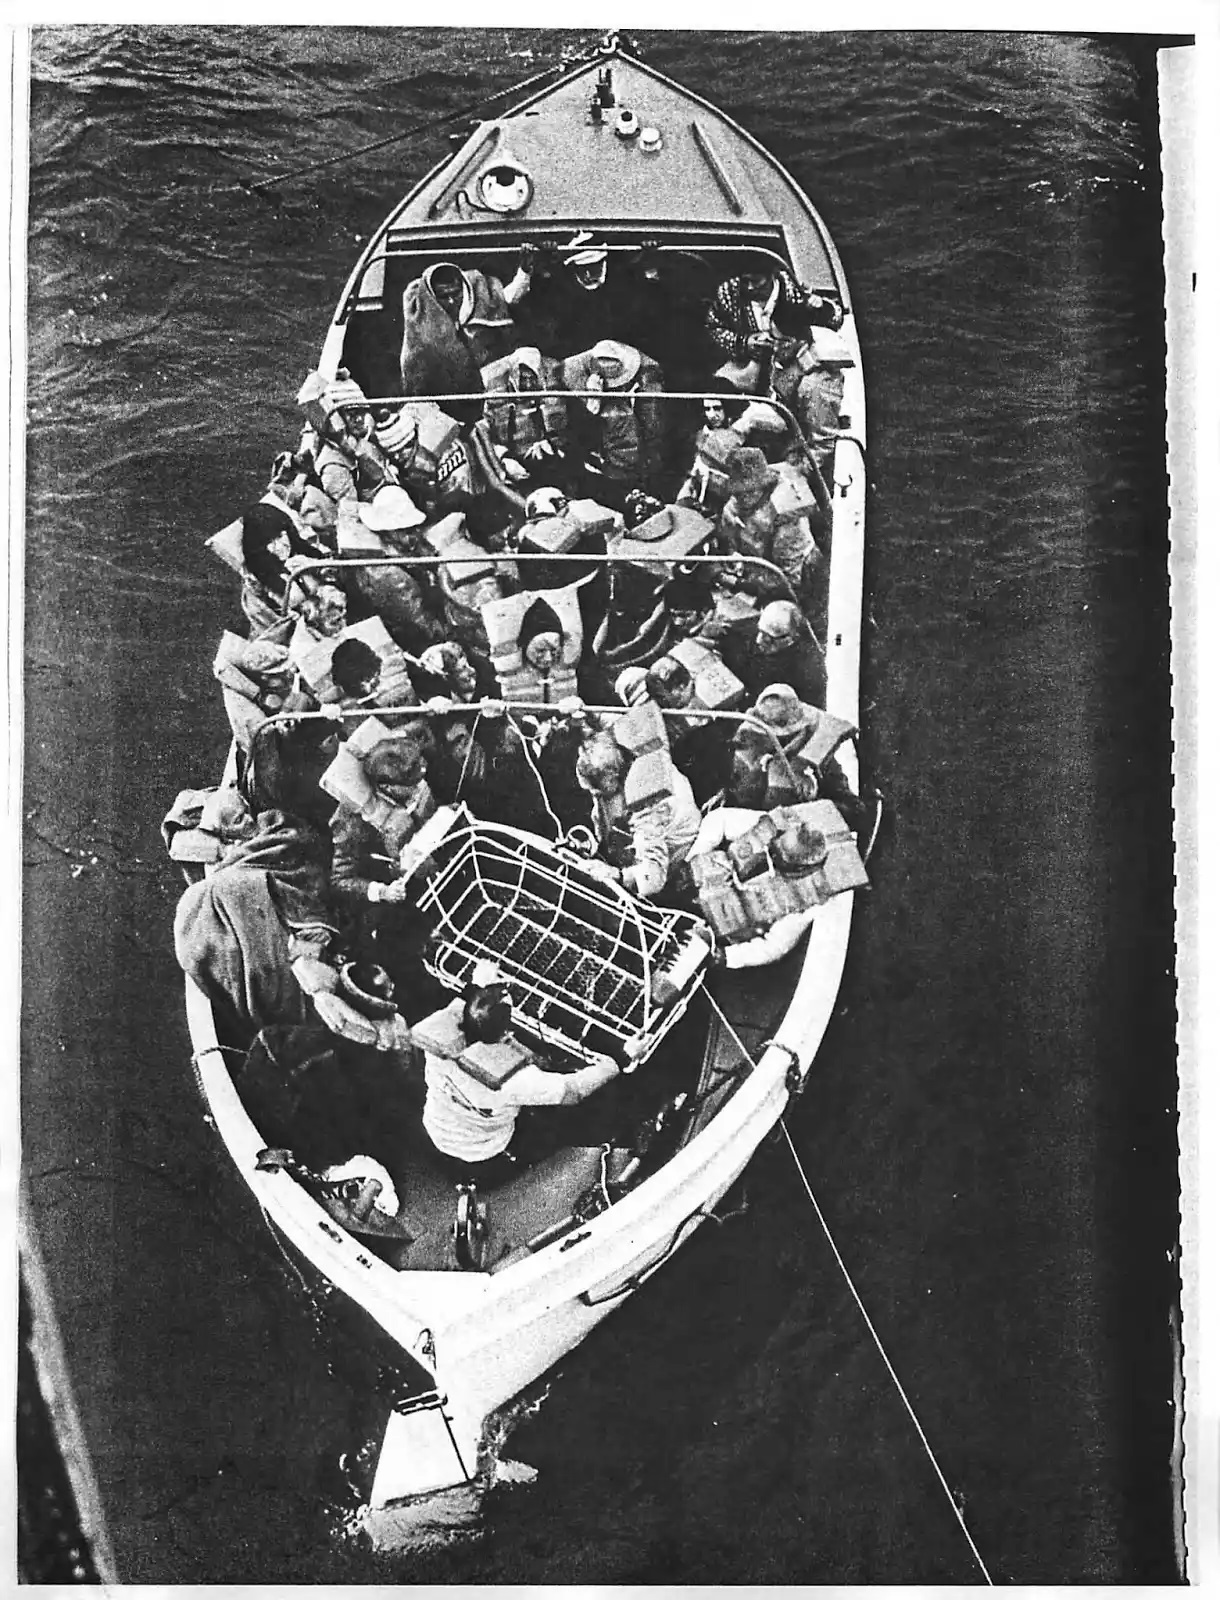 Black and white photo of a Prinsendam motor lifeboat full of passengers during helicopter hoist operations. (Kodiak Maritime Museum)